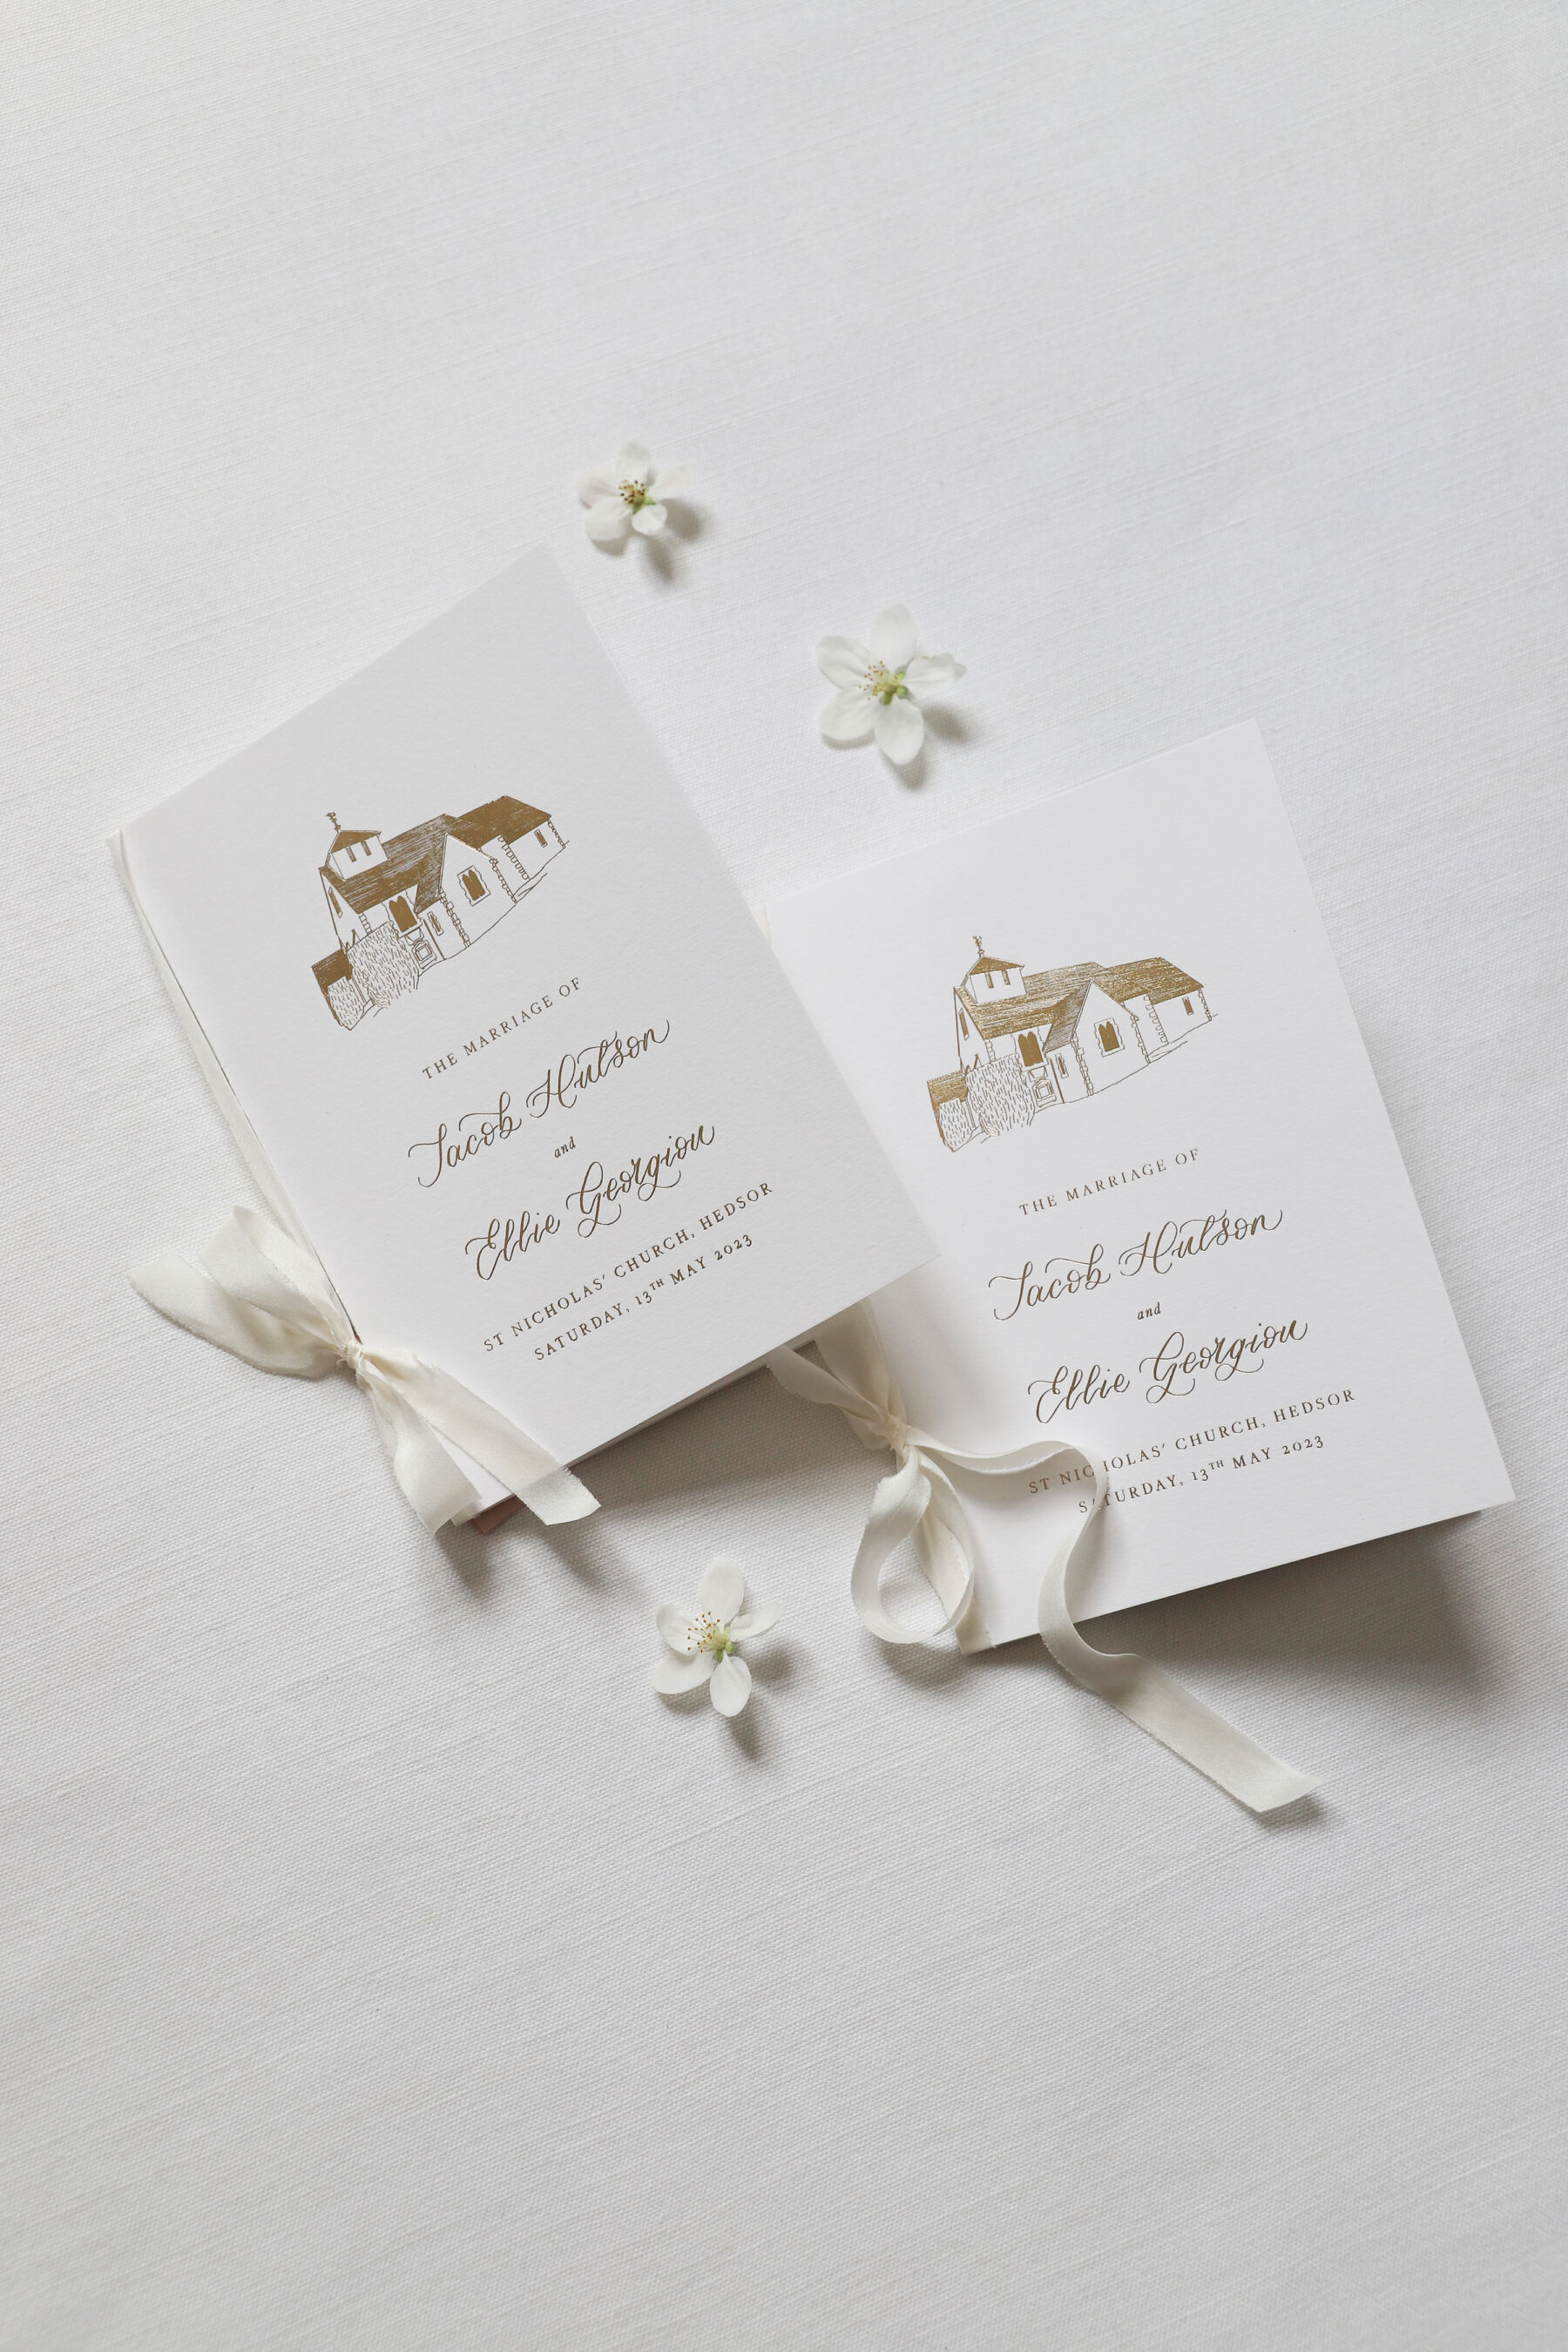 Bespoke Order of Service booklets with hot foil printed illustration and silk ribbon.